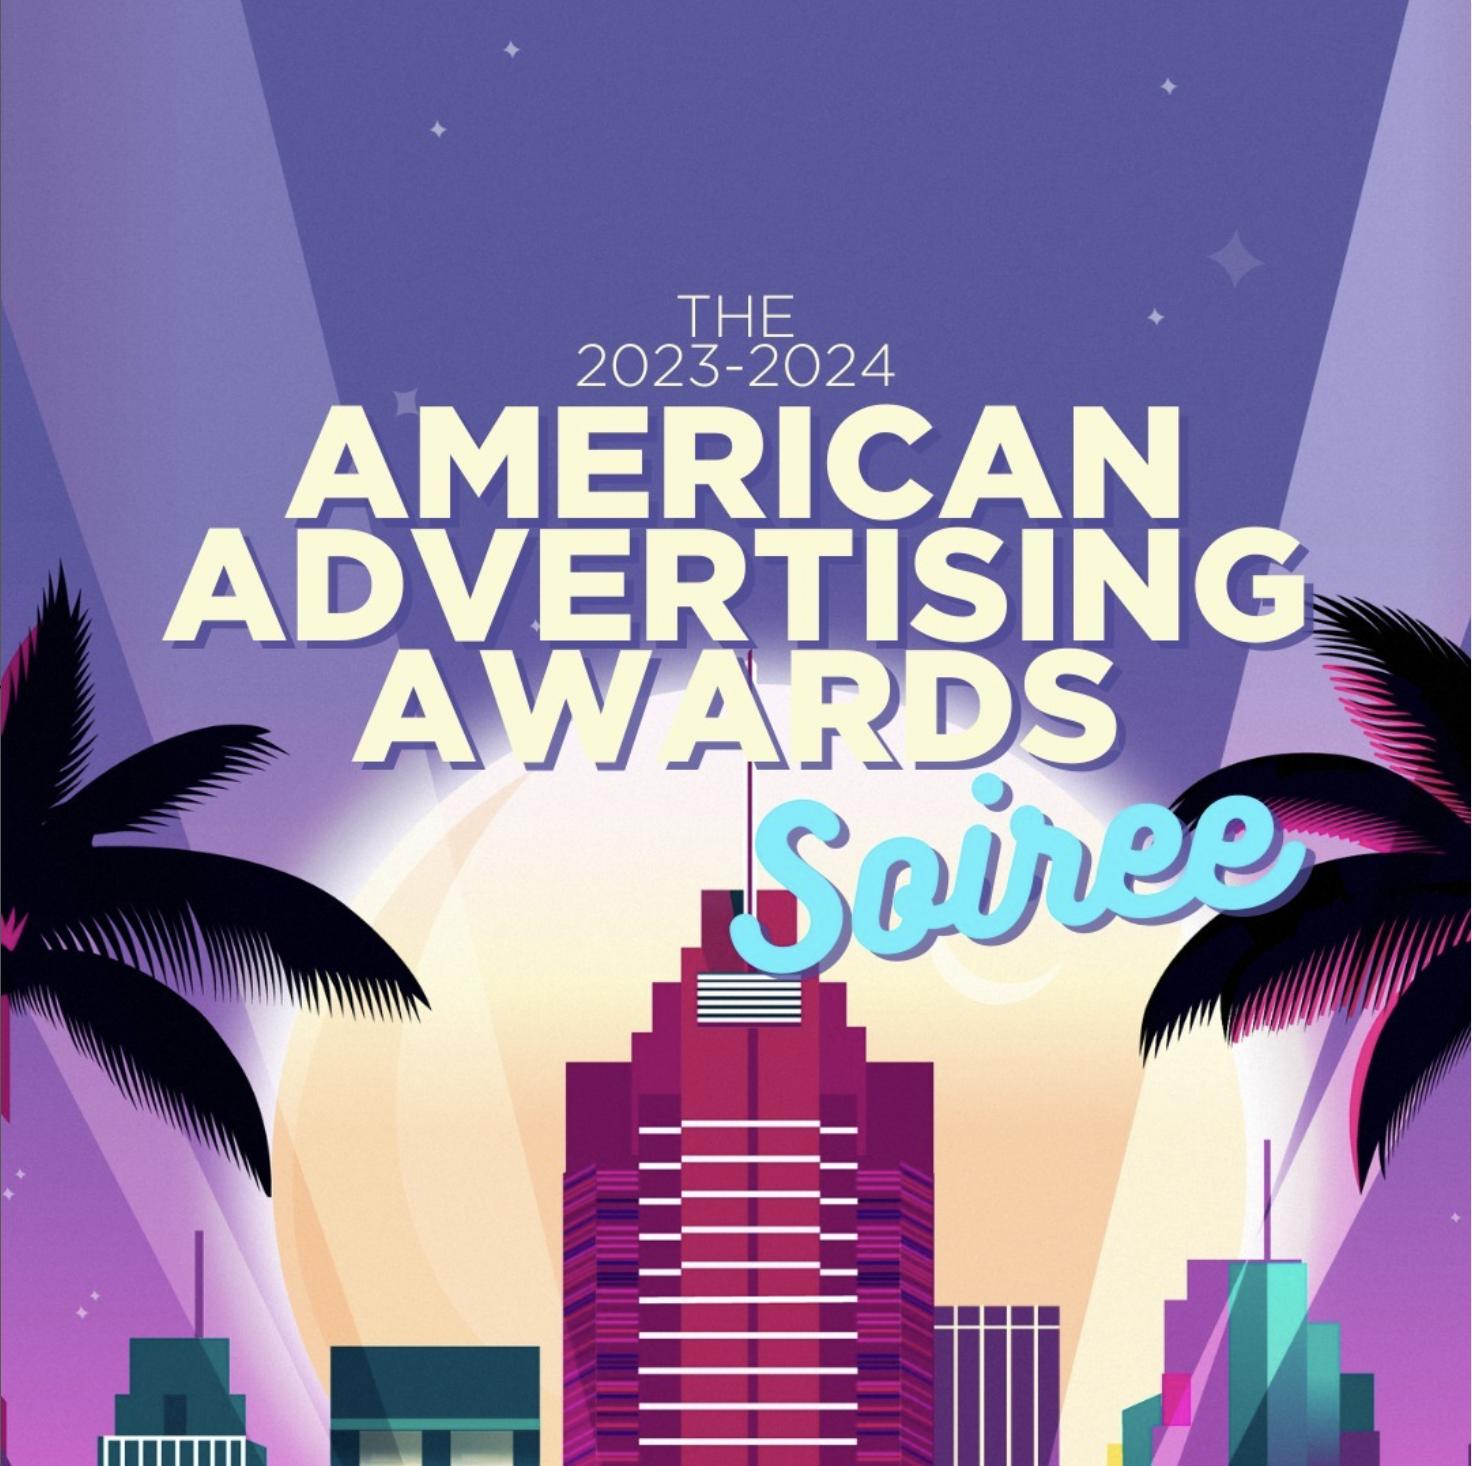 AAF Miami Presents the American Advertising Awards Soiree